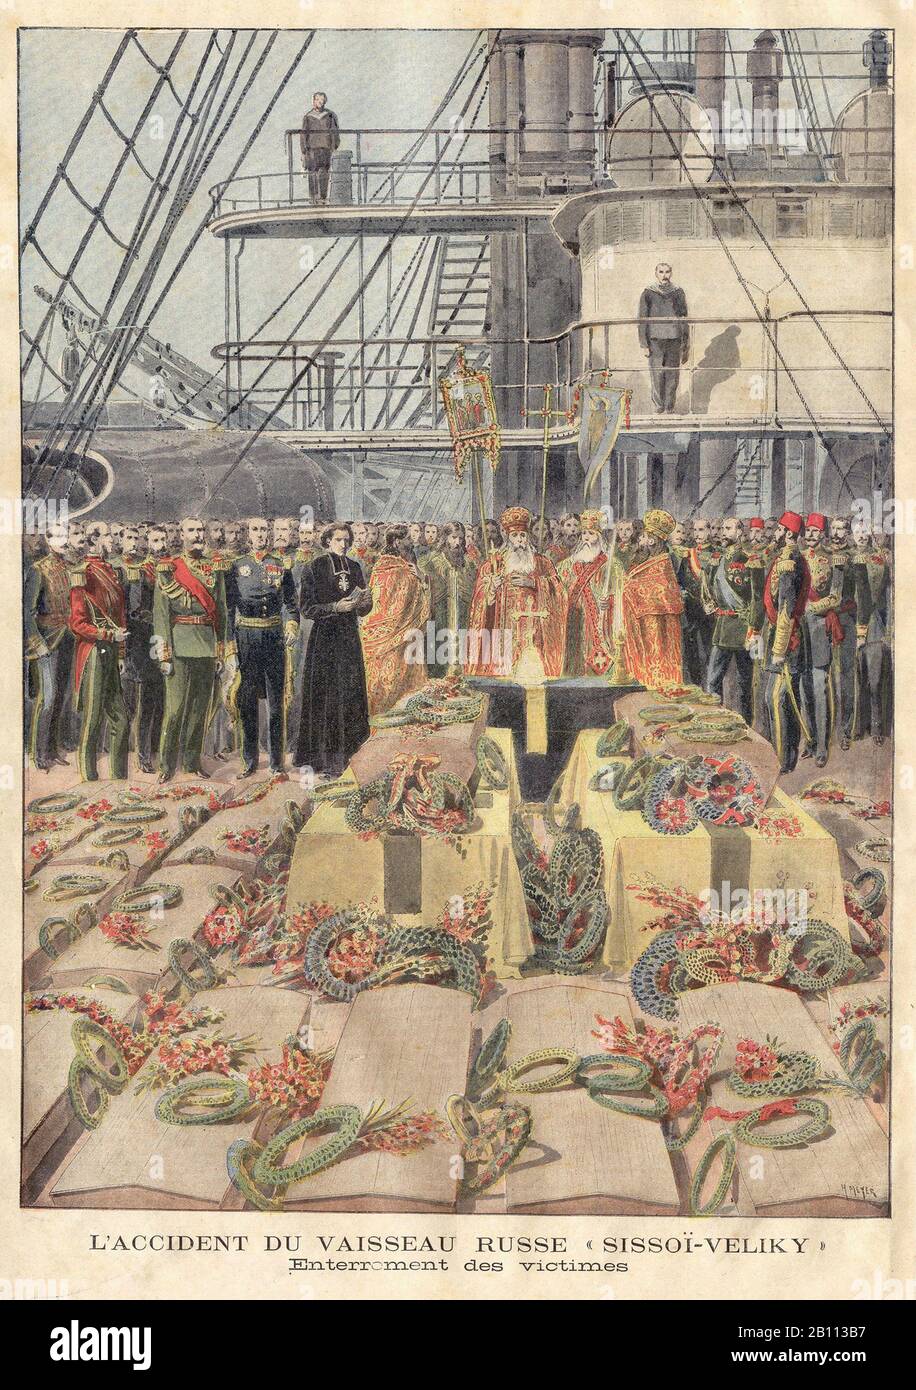 L'ACCIDENT DU VAISSEAU RUSSE SISSOï-VELIKY - THE RUSSIAN SHIP ACCIDENT SISSOI-VELIKY - In 'Le Petit Journal' French Illustrated newspaper - Stock Photo